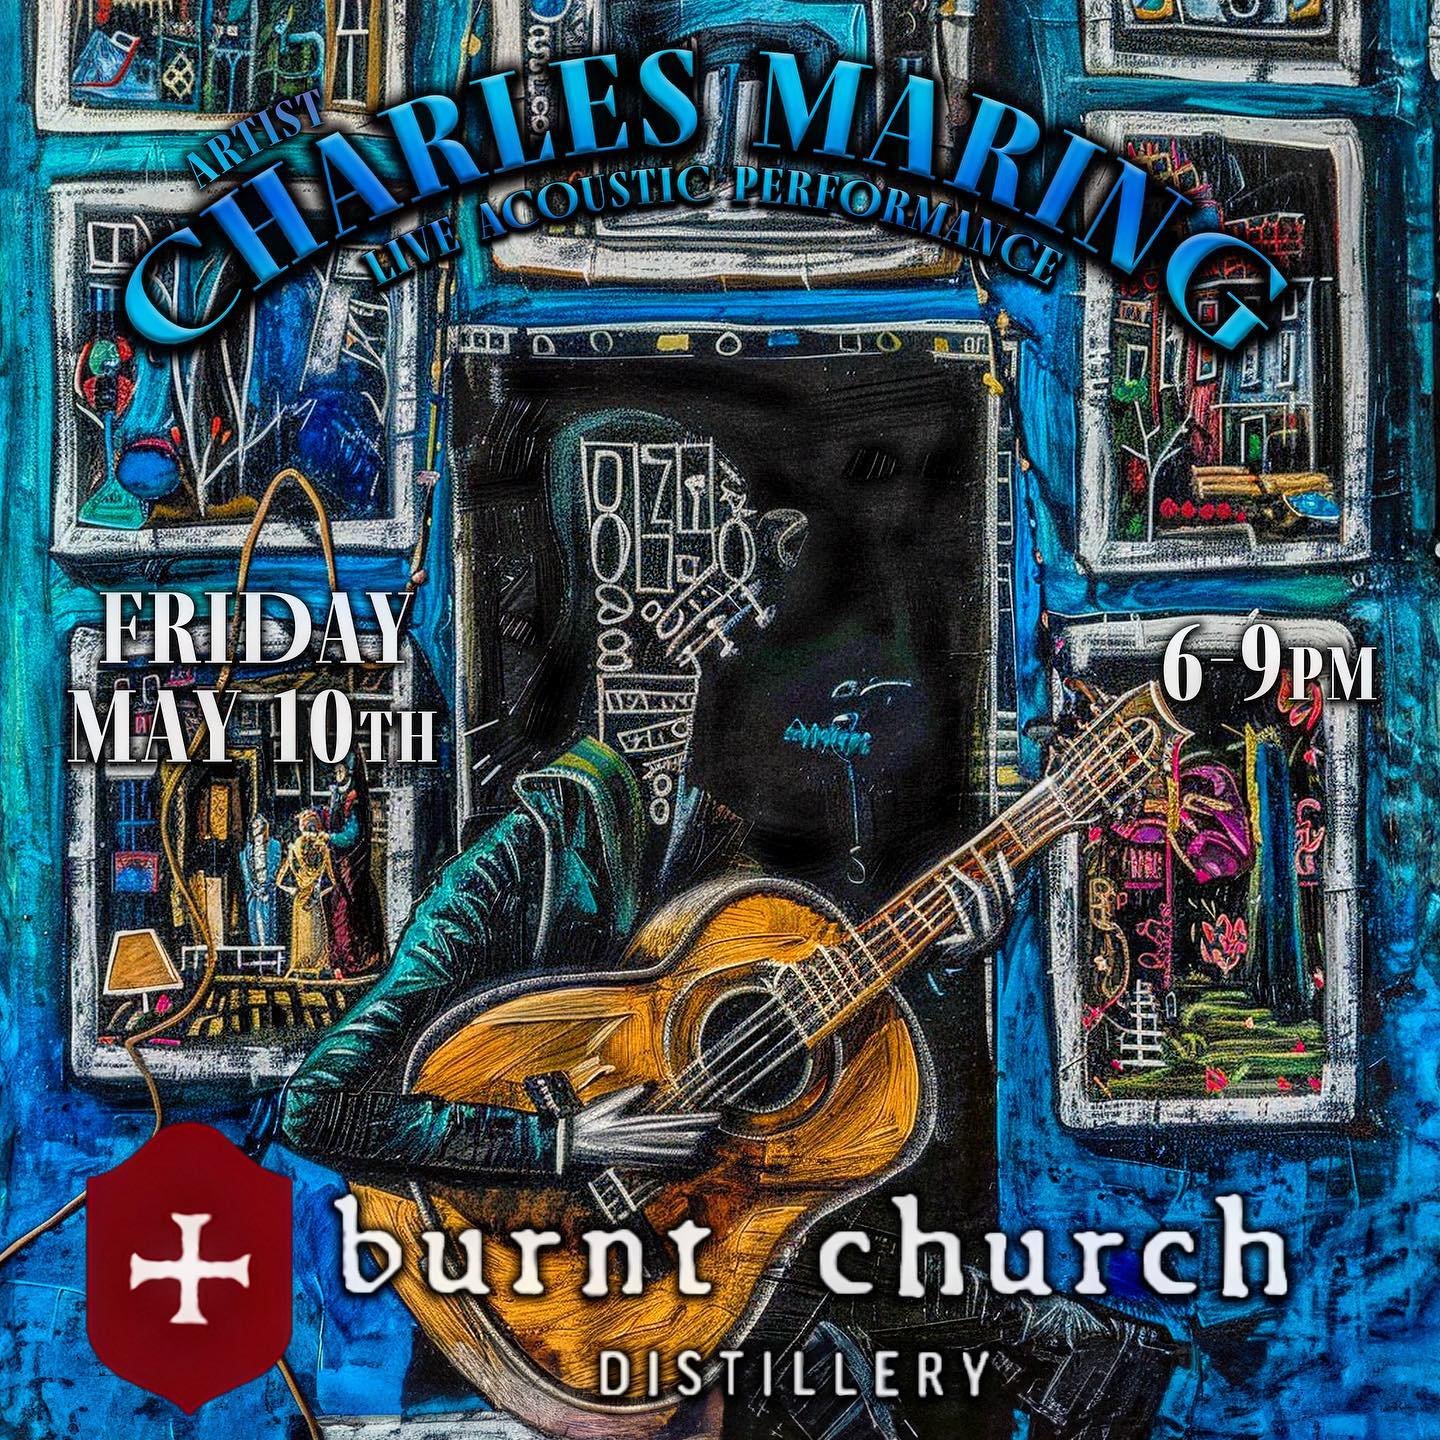 I&rsquo;m rock&rsquo;n the tunes this Friday at @burntchurchdistillery in #blufftonsc from 6-9pm Come out and chill with craft cocktails and #livemusic #visitbluffton